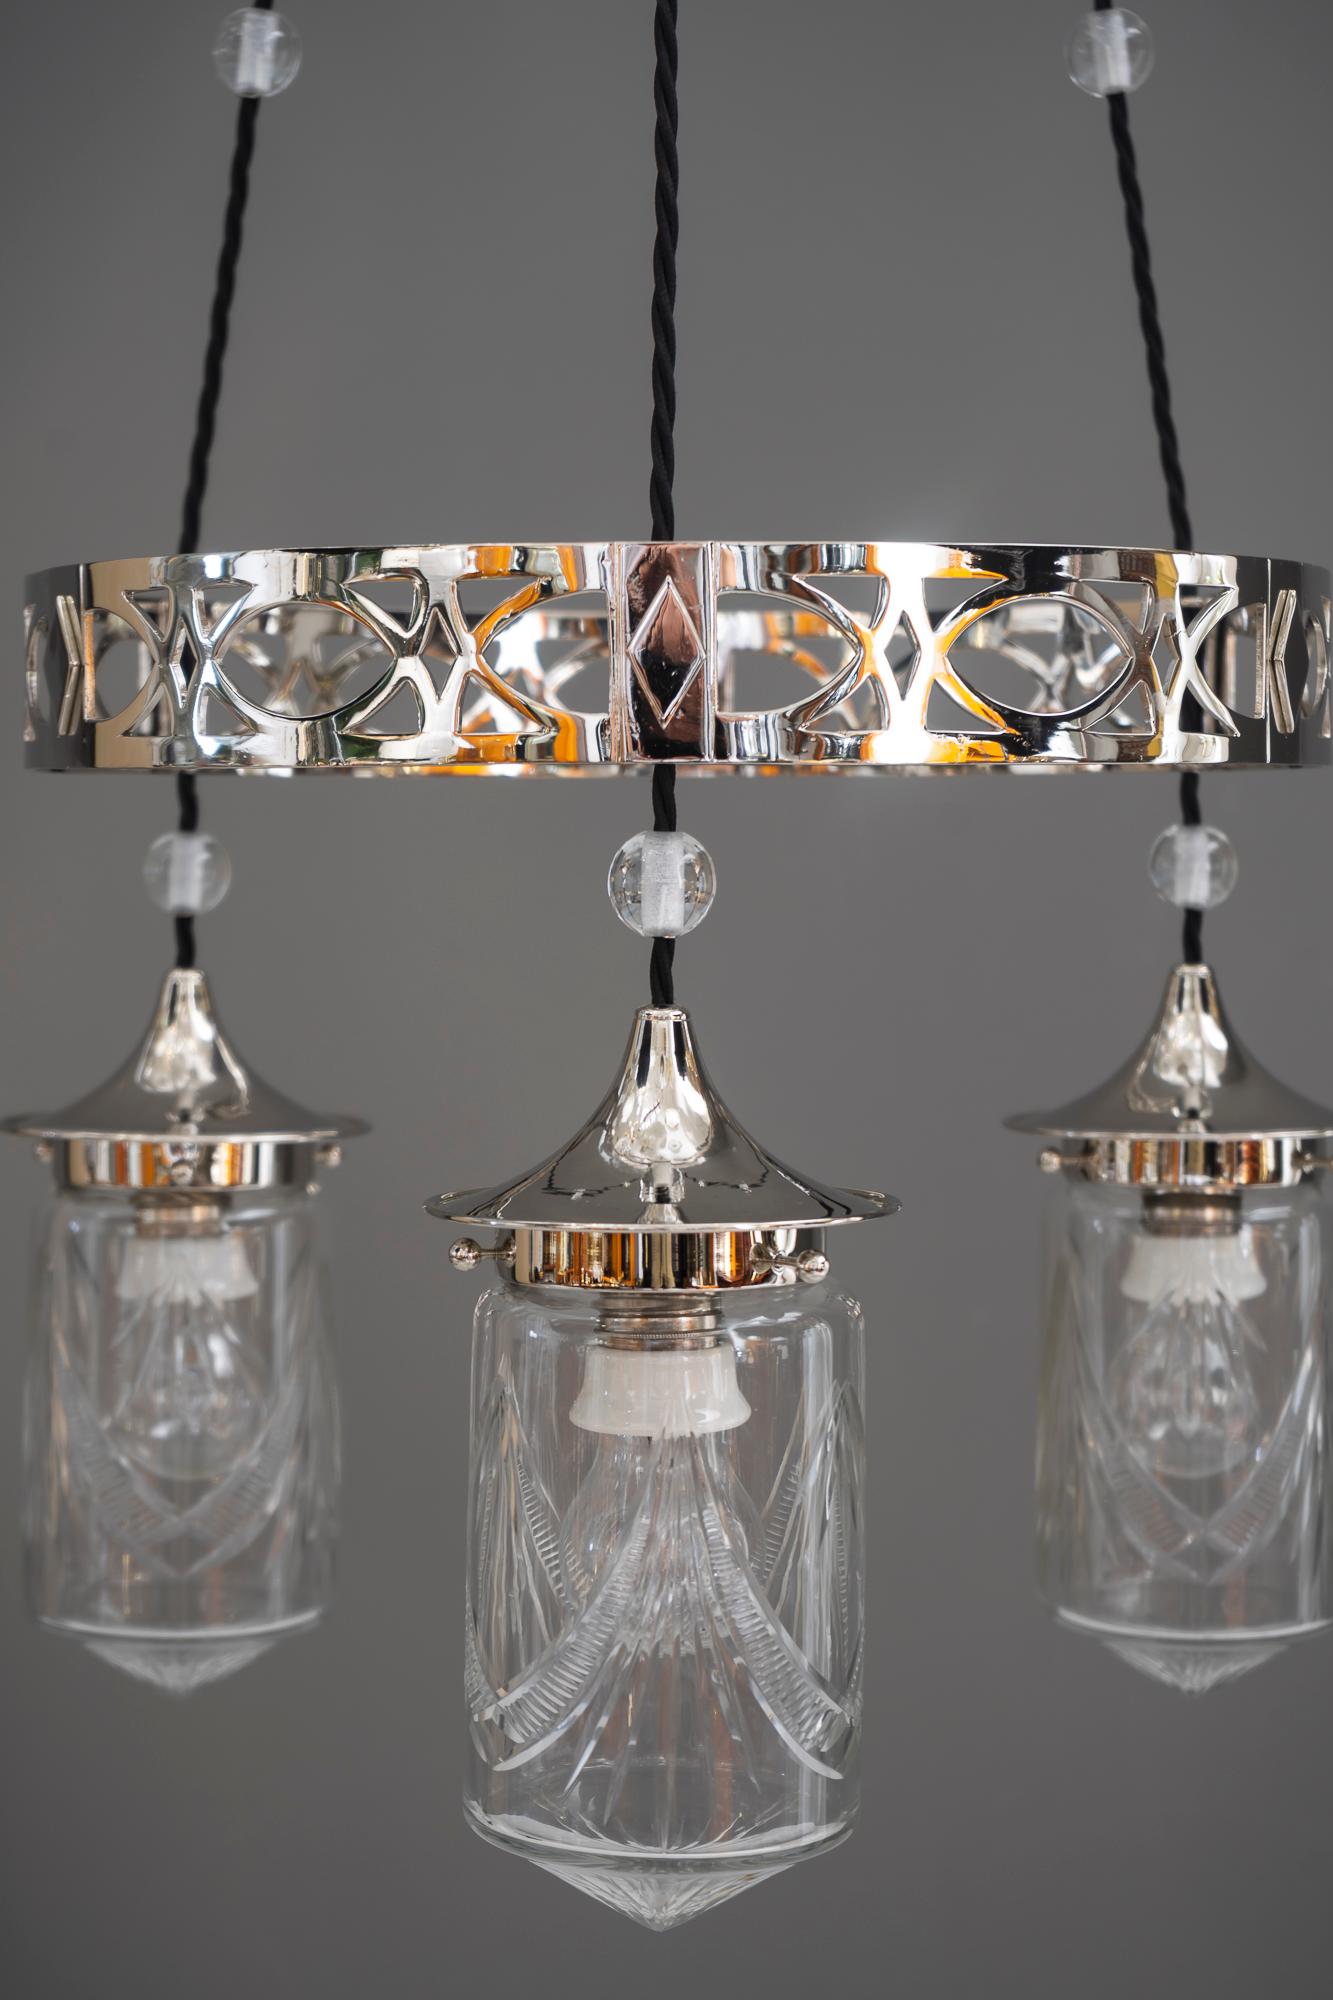 Nickel-Plated Art Deco Chandelier with Original Cut-Glasses, circa 1920s For Sale 6